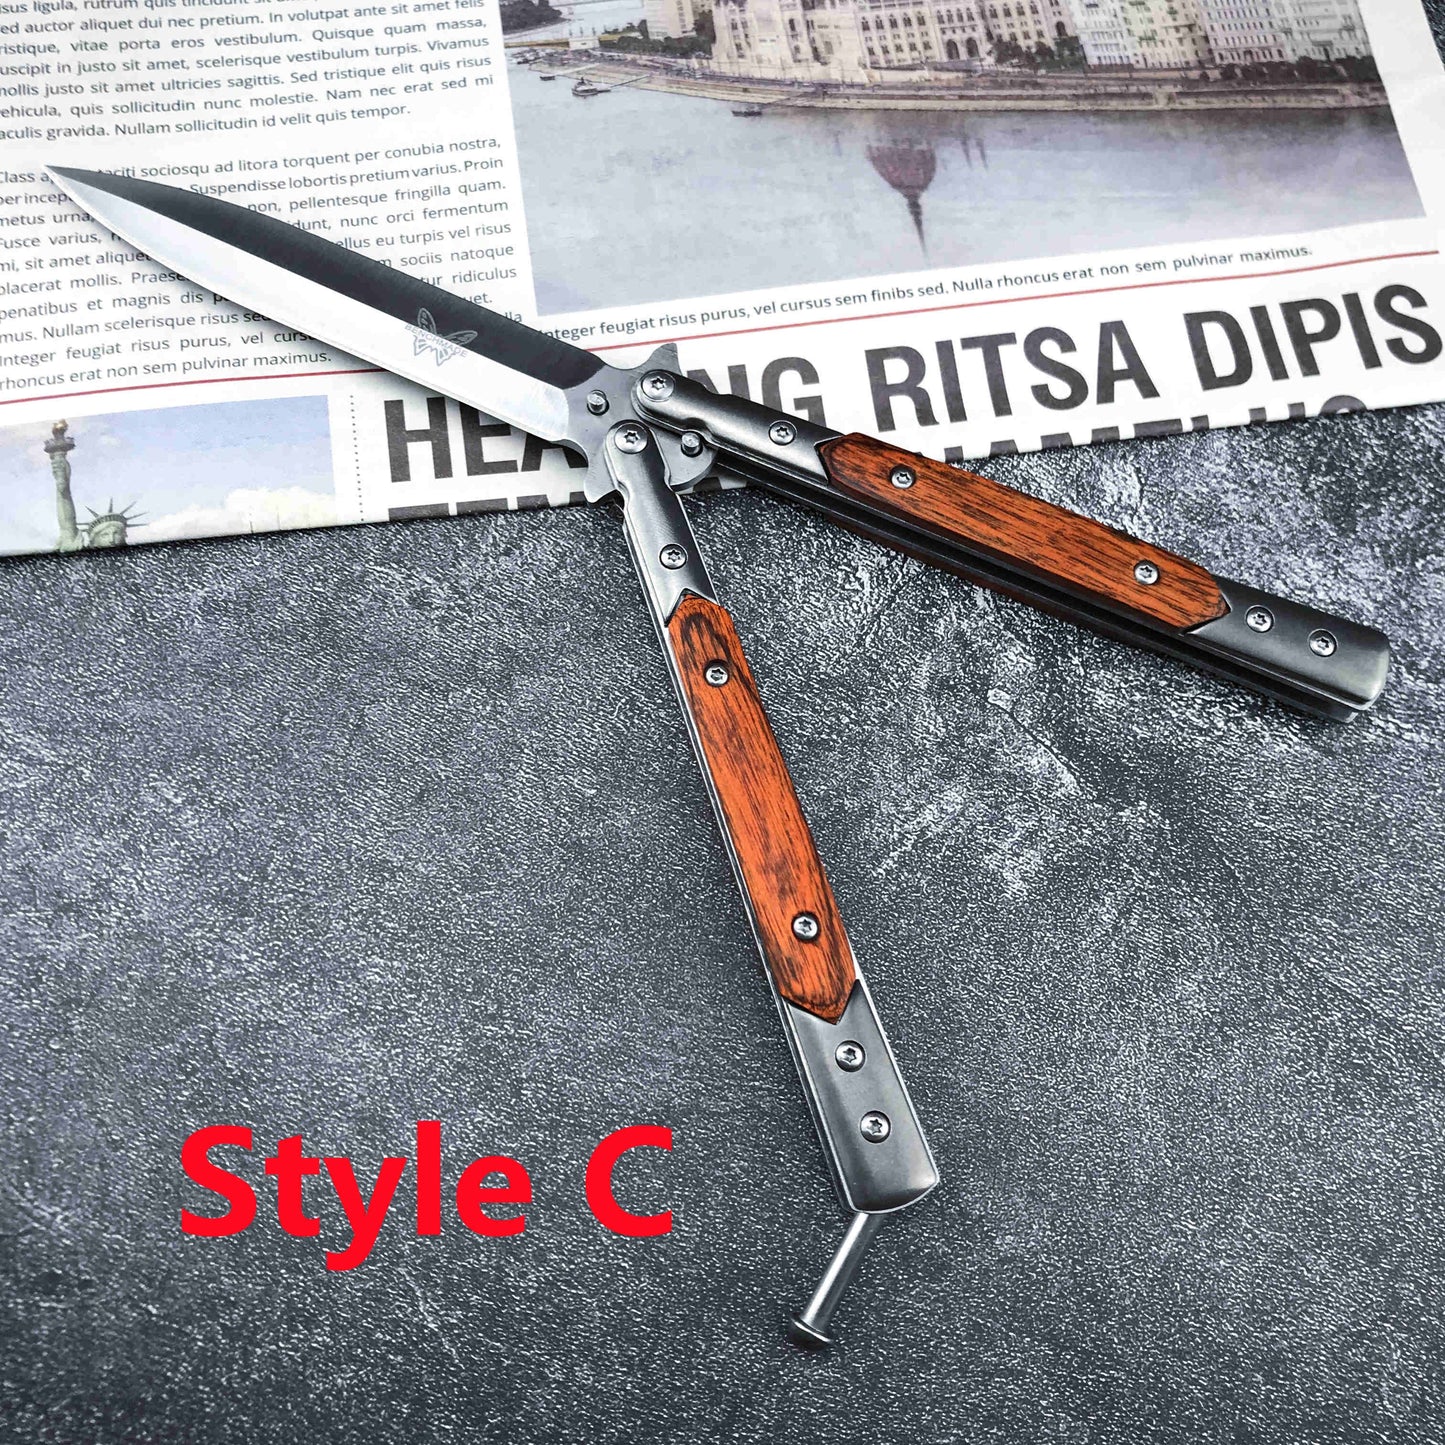 2021 NEW Handmade Sharp Razor Blade Tactical Butterfly Knives Trainer Flipping Balisong Practice Knife Tanto Wood Handle Outdoor Survival Combat Hunting Knife Christmas gift